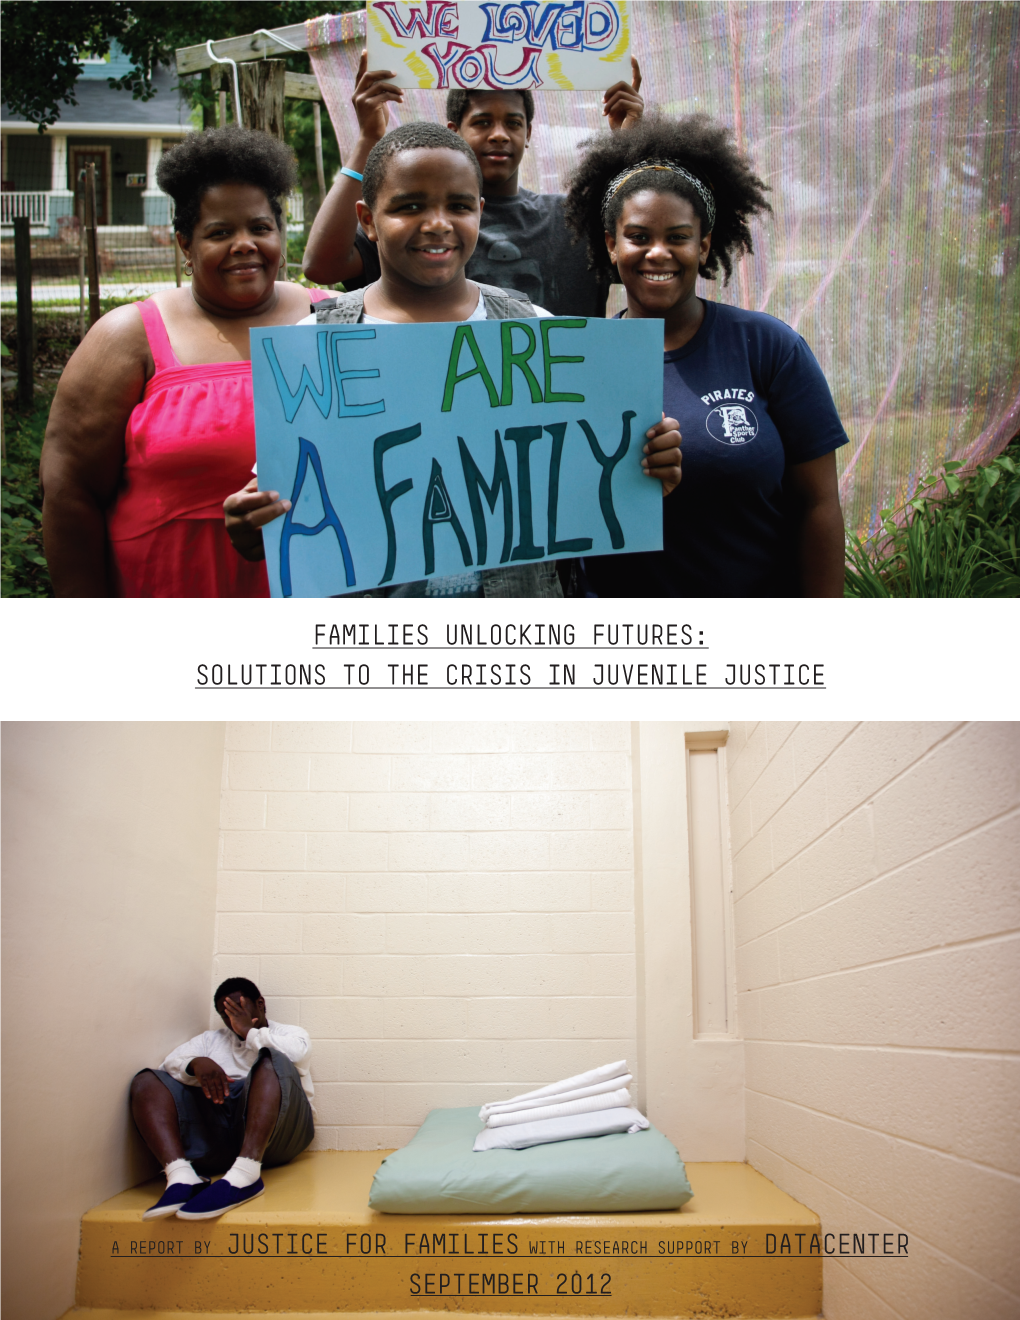 Families Unlocking Futures: Solutions to the Crisis in Juvenile Justice